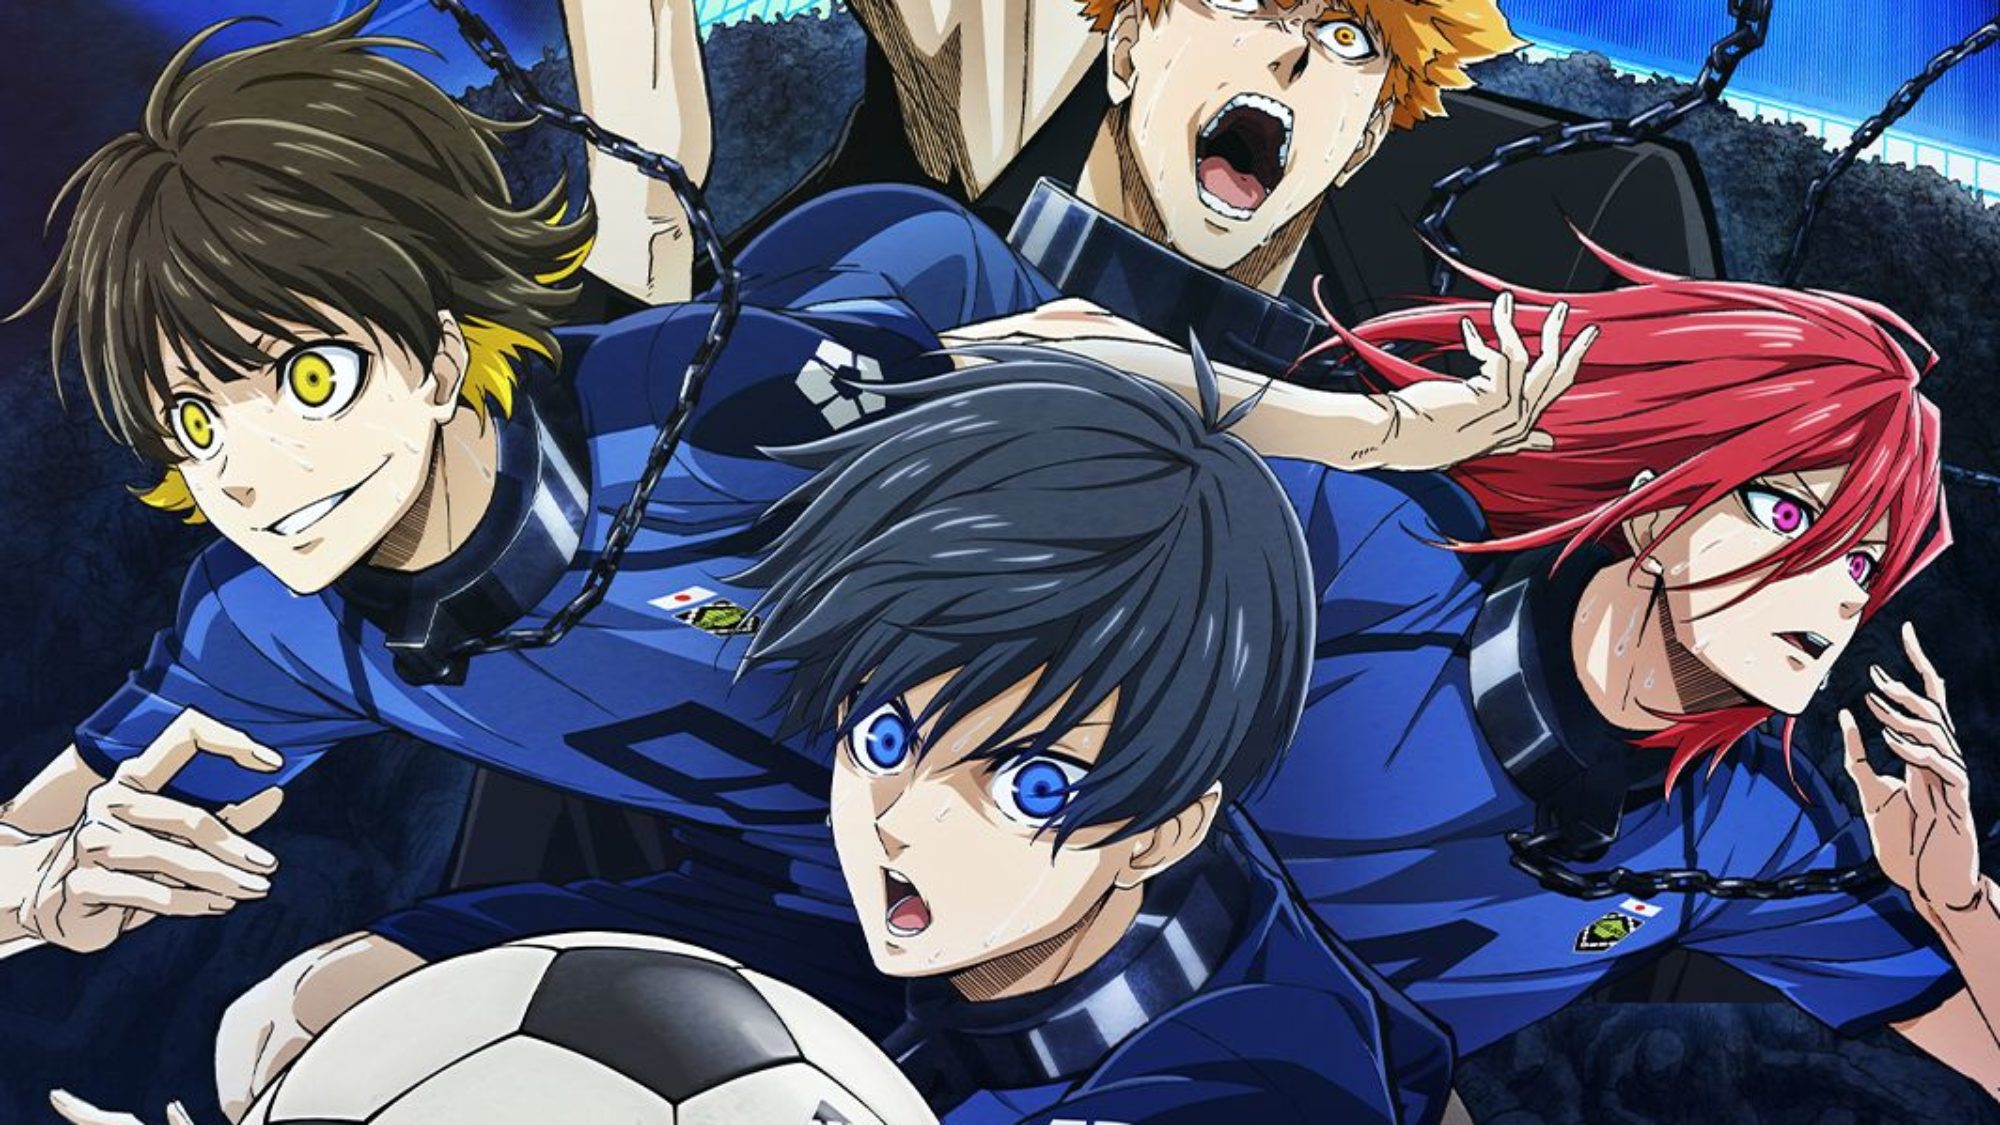 Crunchyroll Streaming 20 Sports Anime Series Free for Limited Time